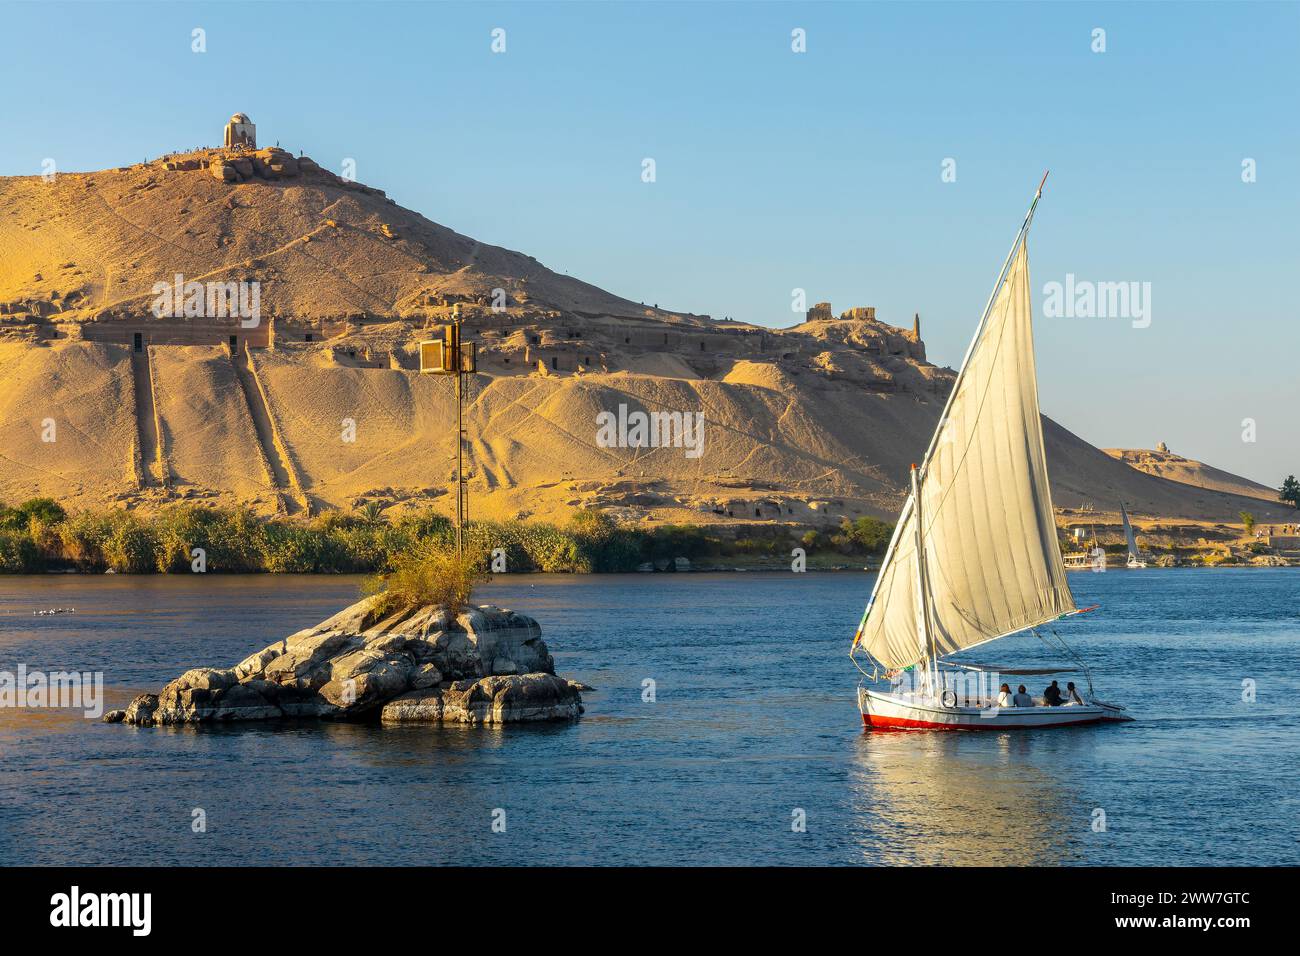 Felucca (traditinal egyptian sailing boat) on the Nile river and the Dome of Abu Al-Hawa (Qubbet el-Hawa) or Dome of the Wind in Aswan, Egypt Stock Photo